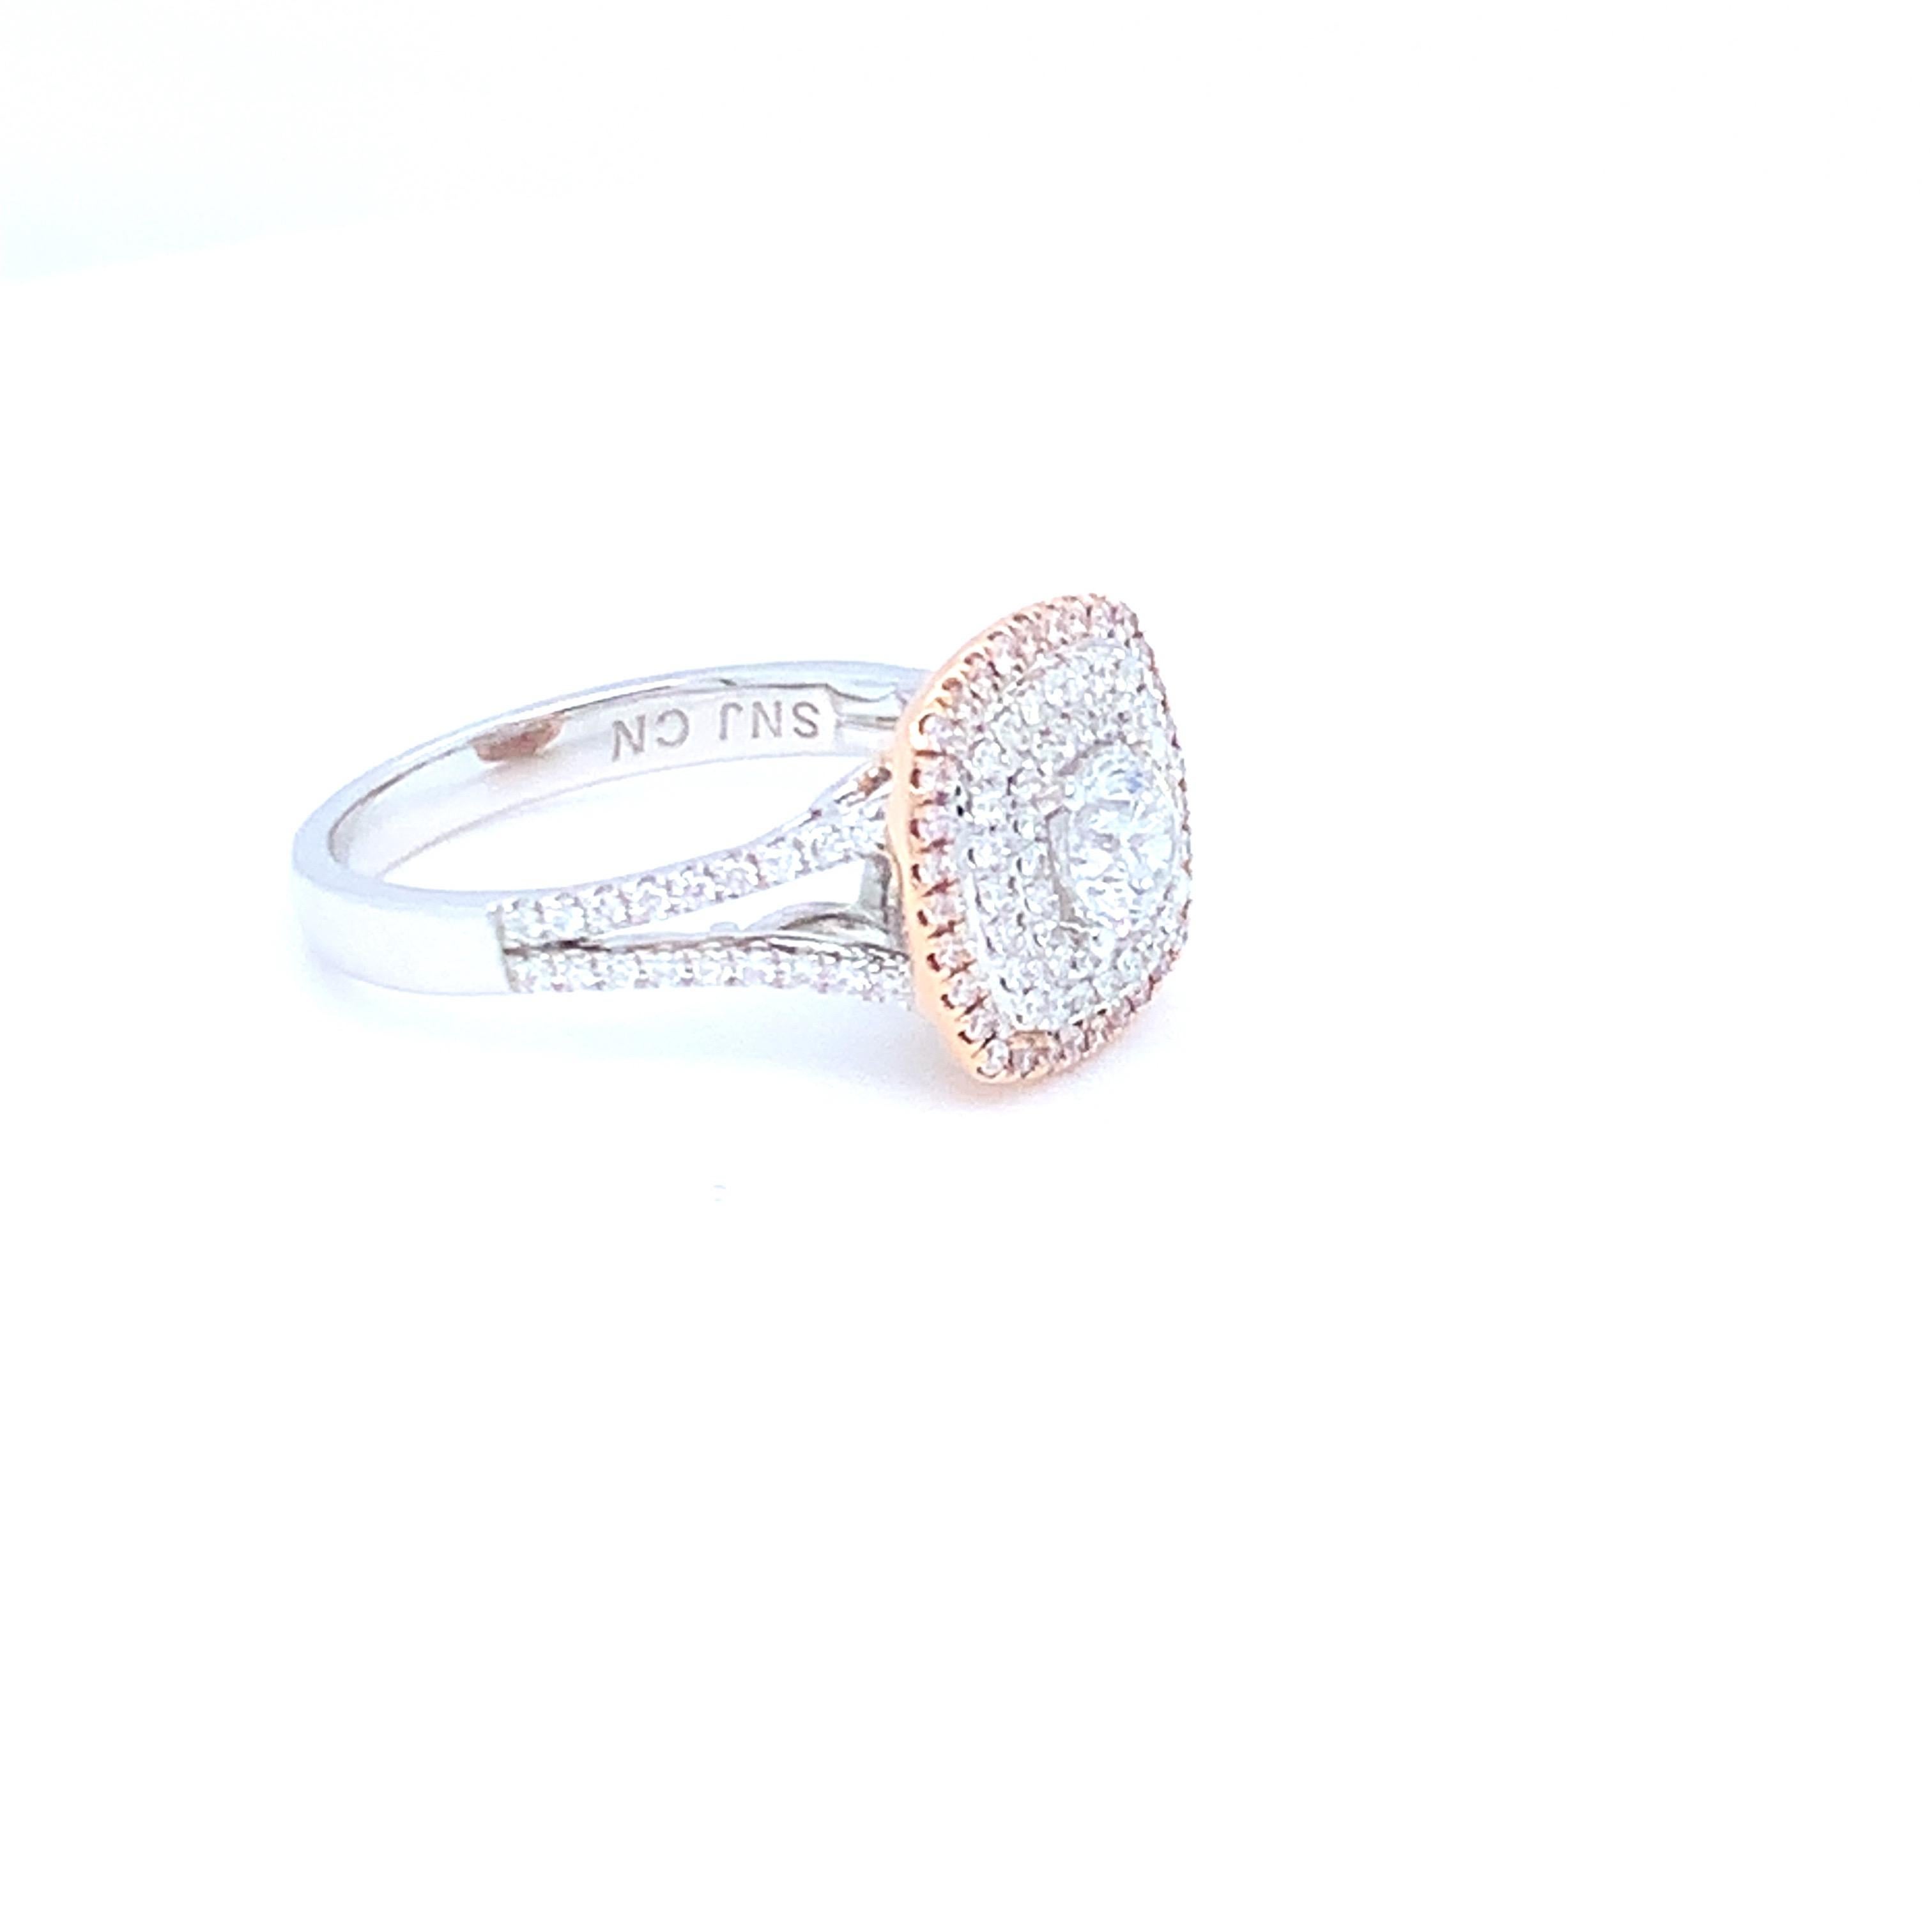 0.58 Carat White Round Diamond Pink Diamond Halo Ring Set in 14 Karat Gold In New Condition For Sale In Trumbull, CT